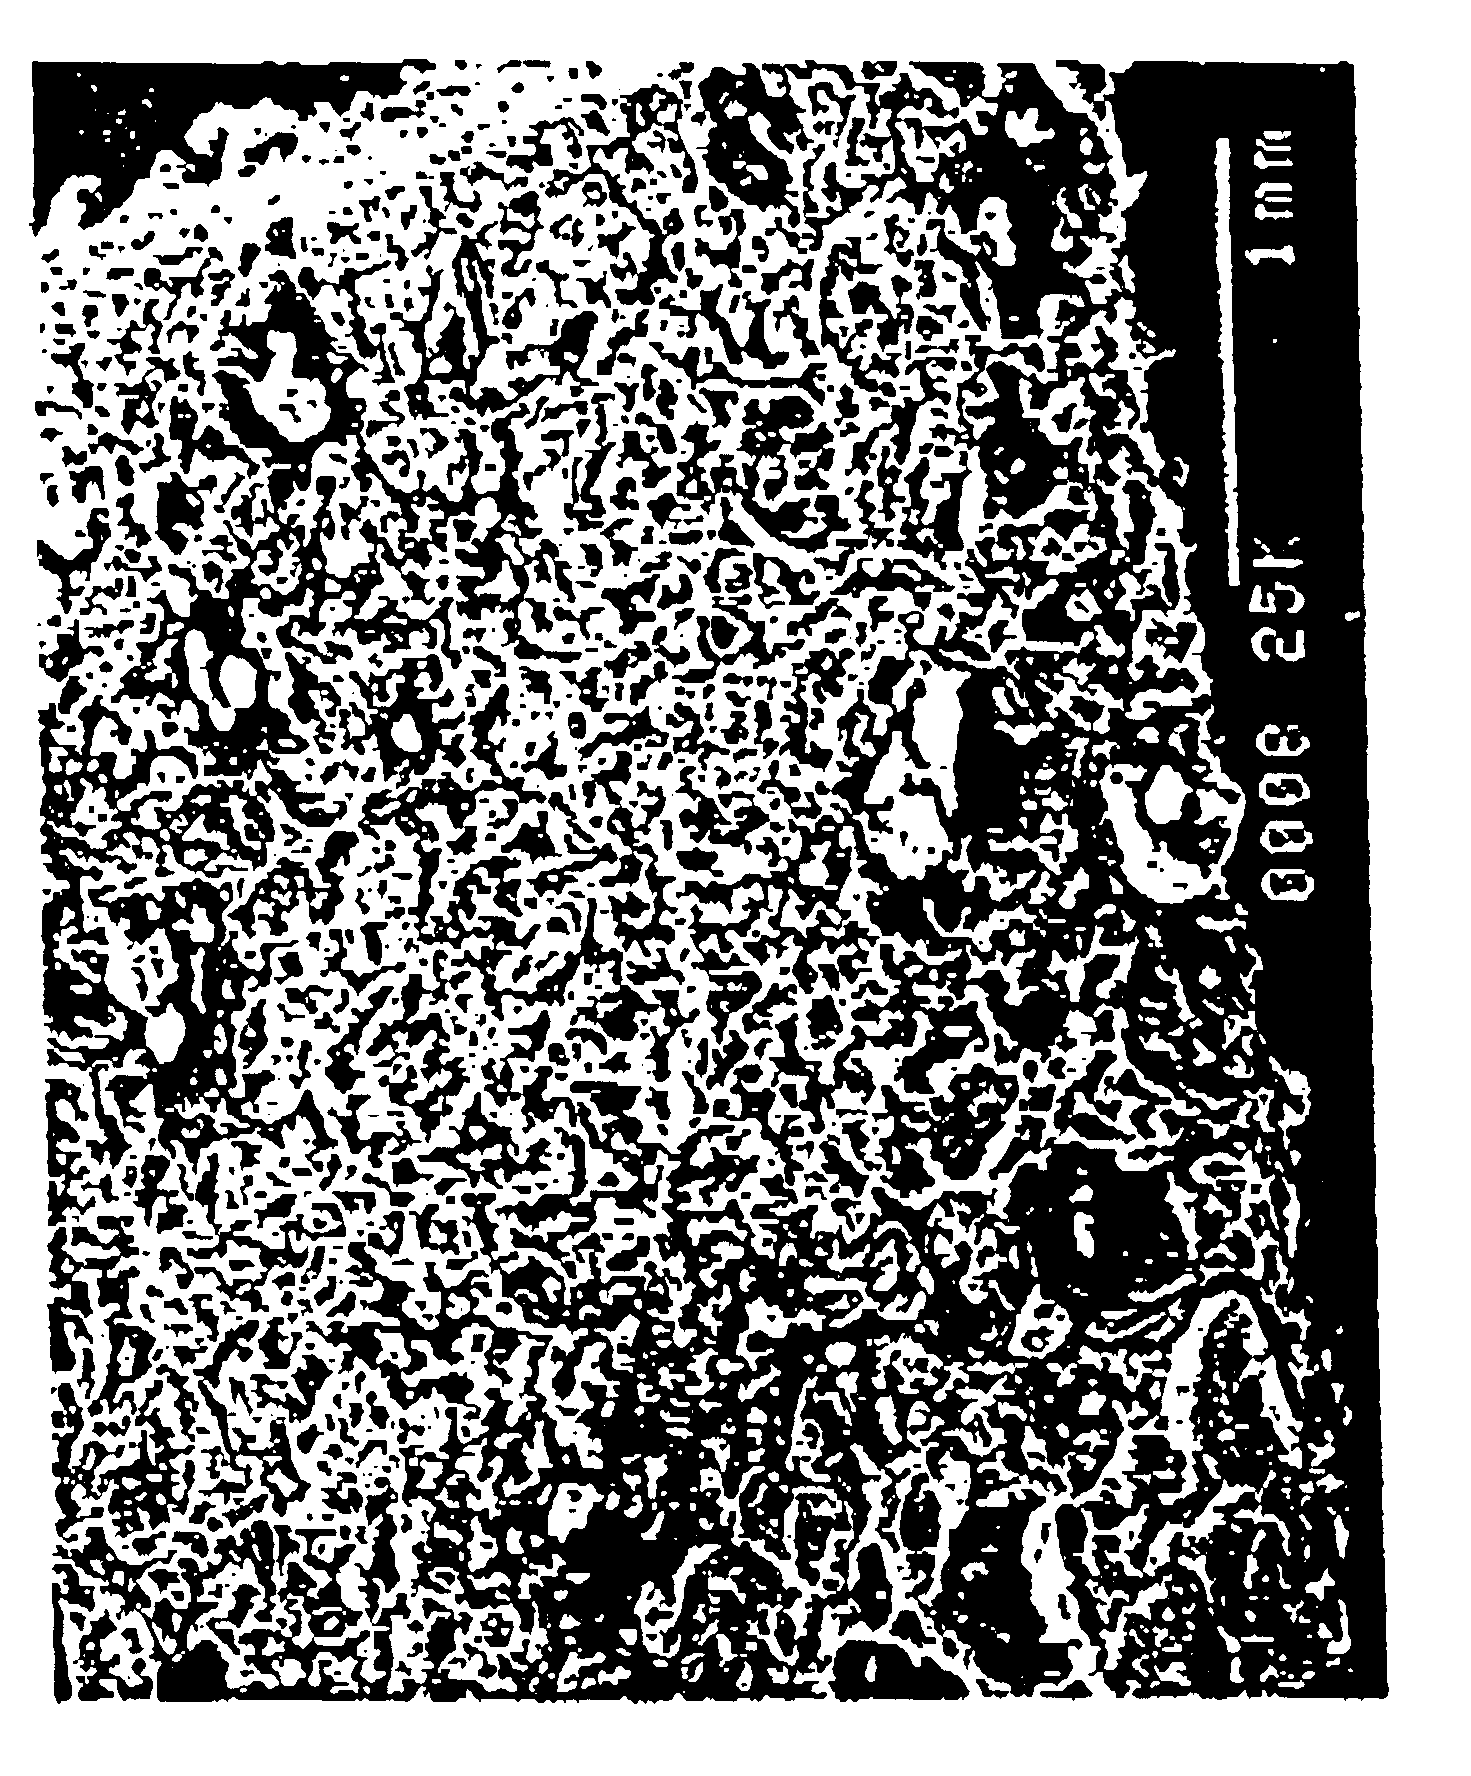 Thermoplastic polymer propellant compositions